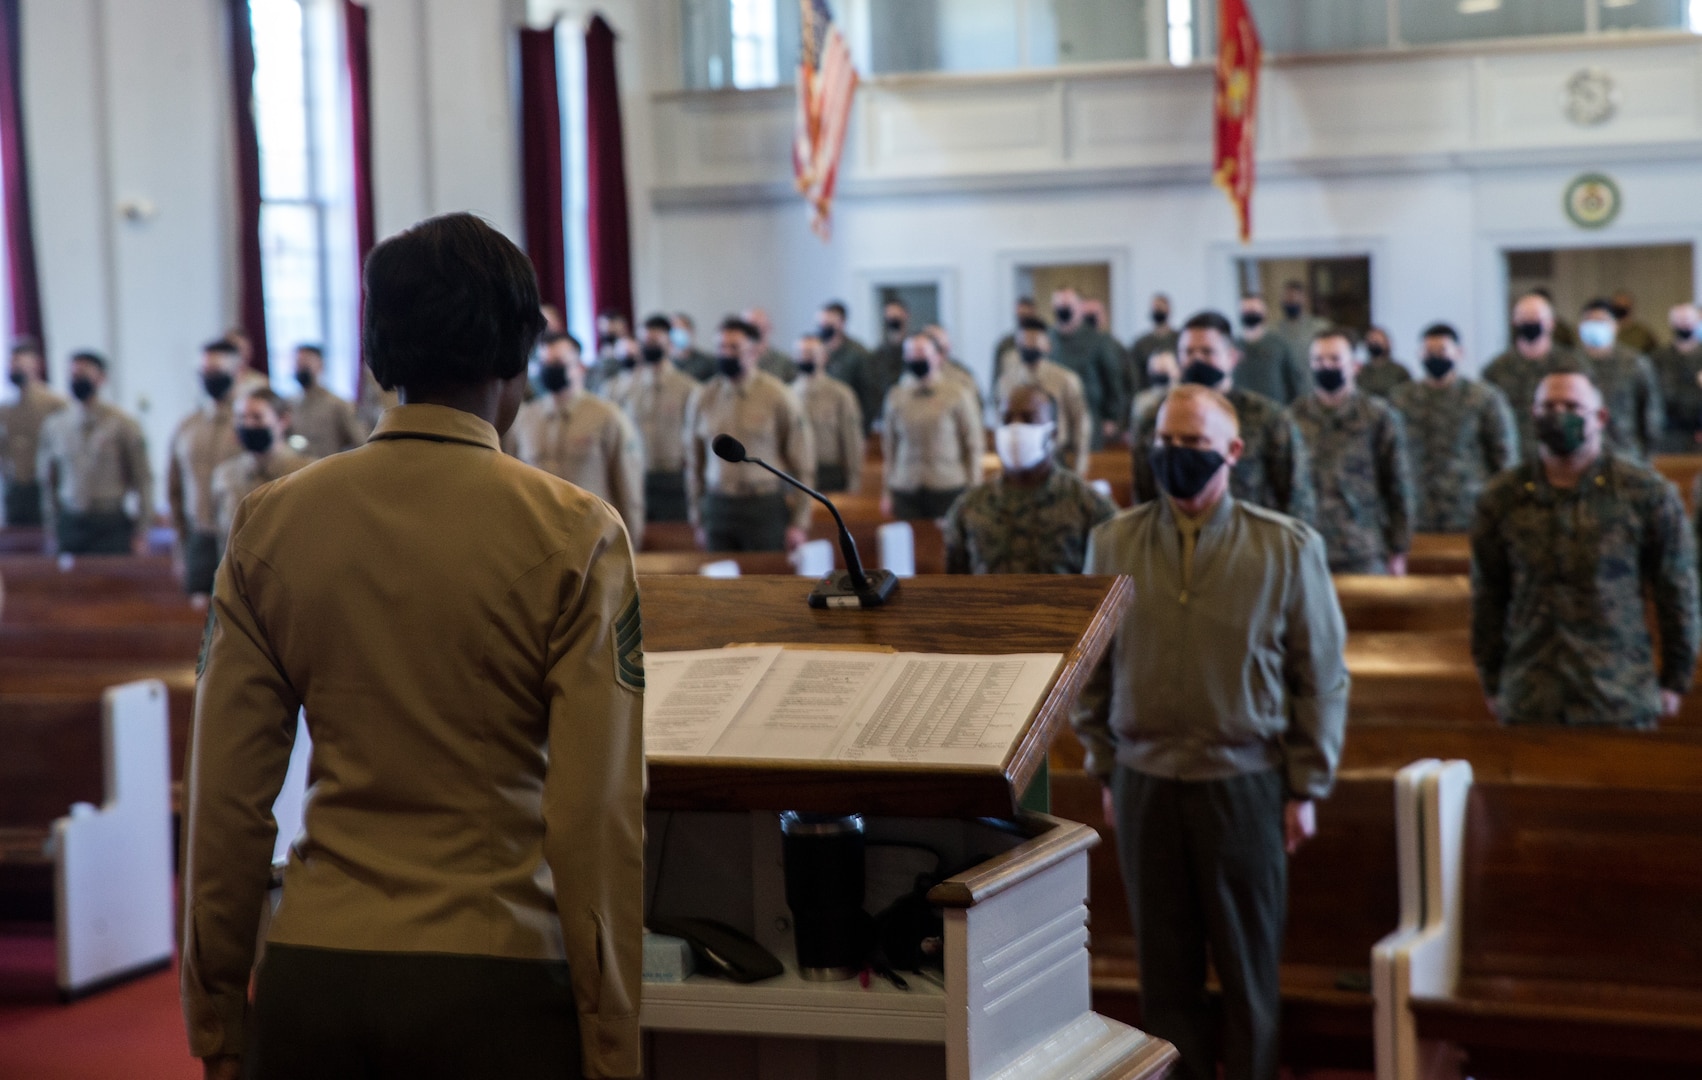 Marines stand at attention for “Anchors Aweigh” during graduation ceremony for Lance Corporal Leadership and Ethics Seminar, Class 1-21, at Marine Corps Air Station, Cherry Point, North Carolina, January 28, 2021 (U.S. Marine Corps/Michael Neuenhoff)